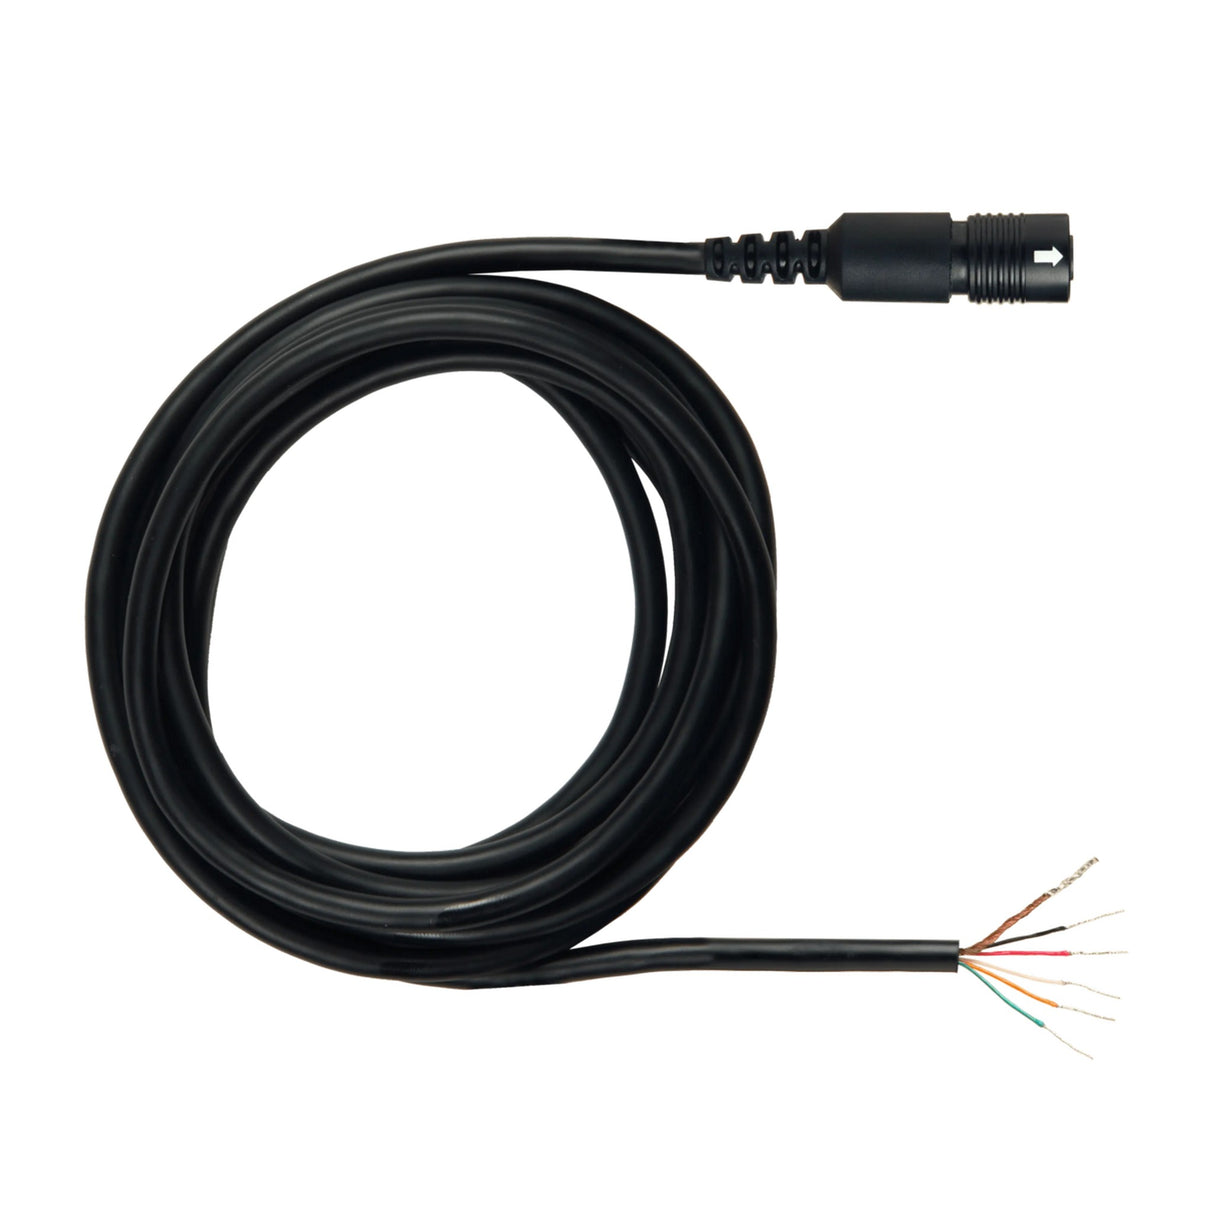 Shure BCASCA1 | Replacement Single Sided Detachable Cable for BRH440M and BRH441M